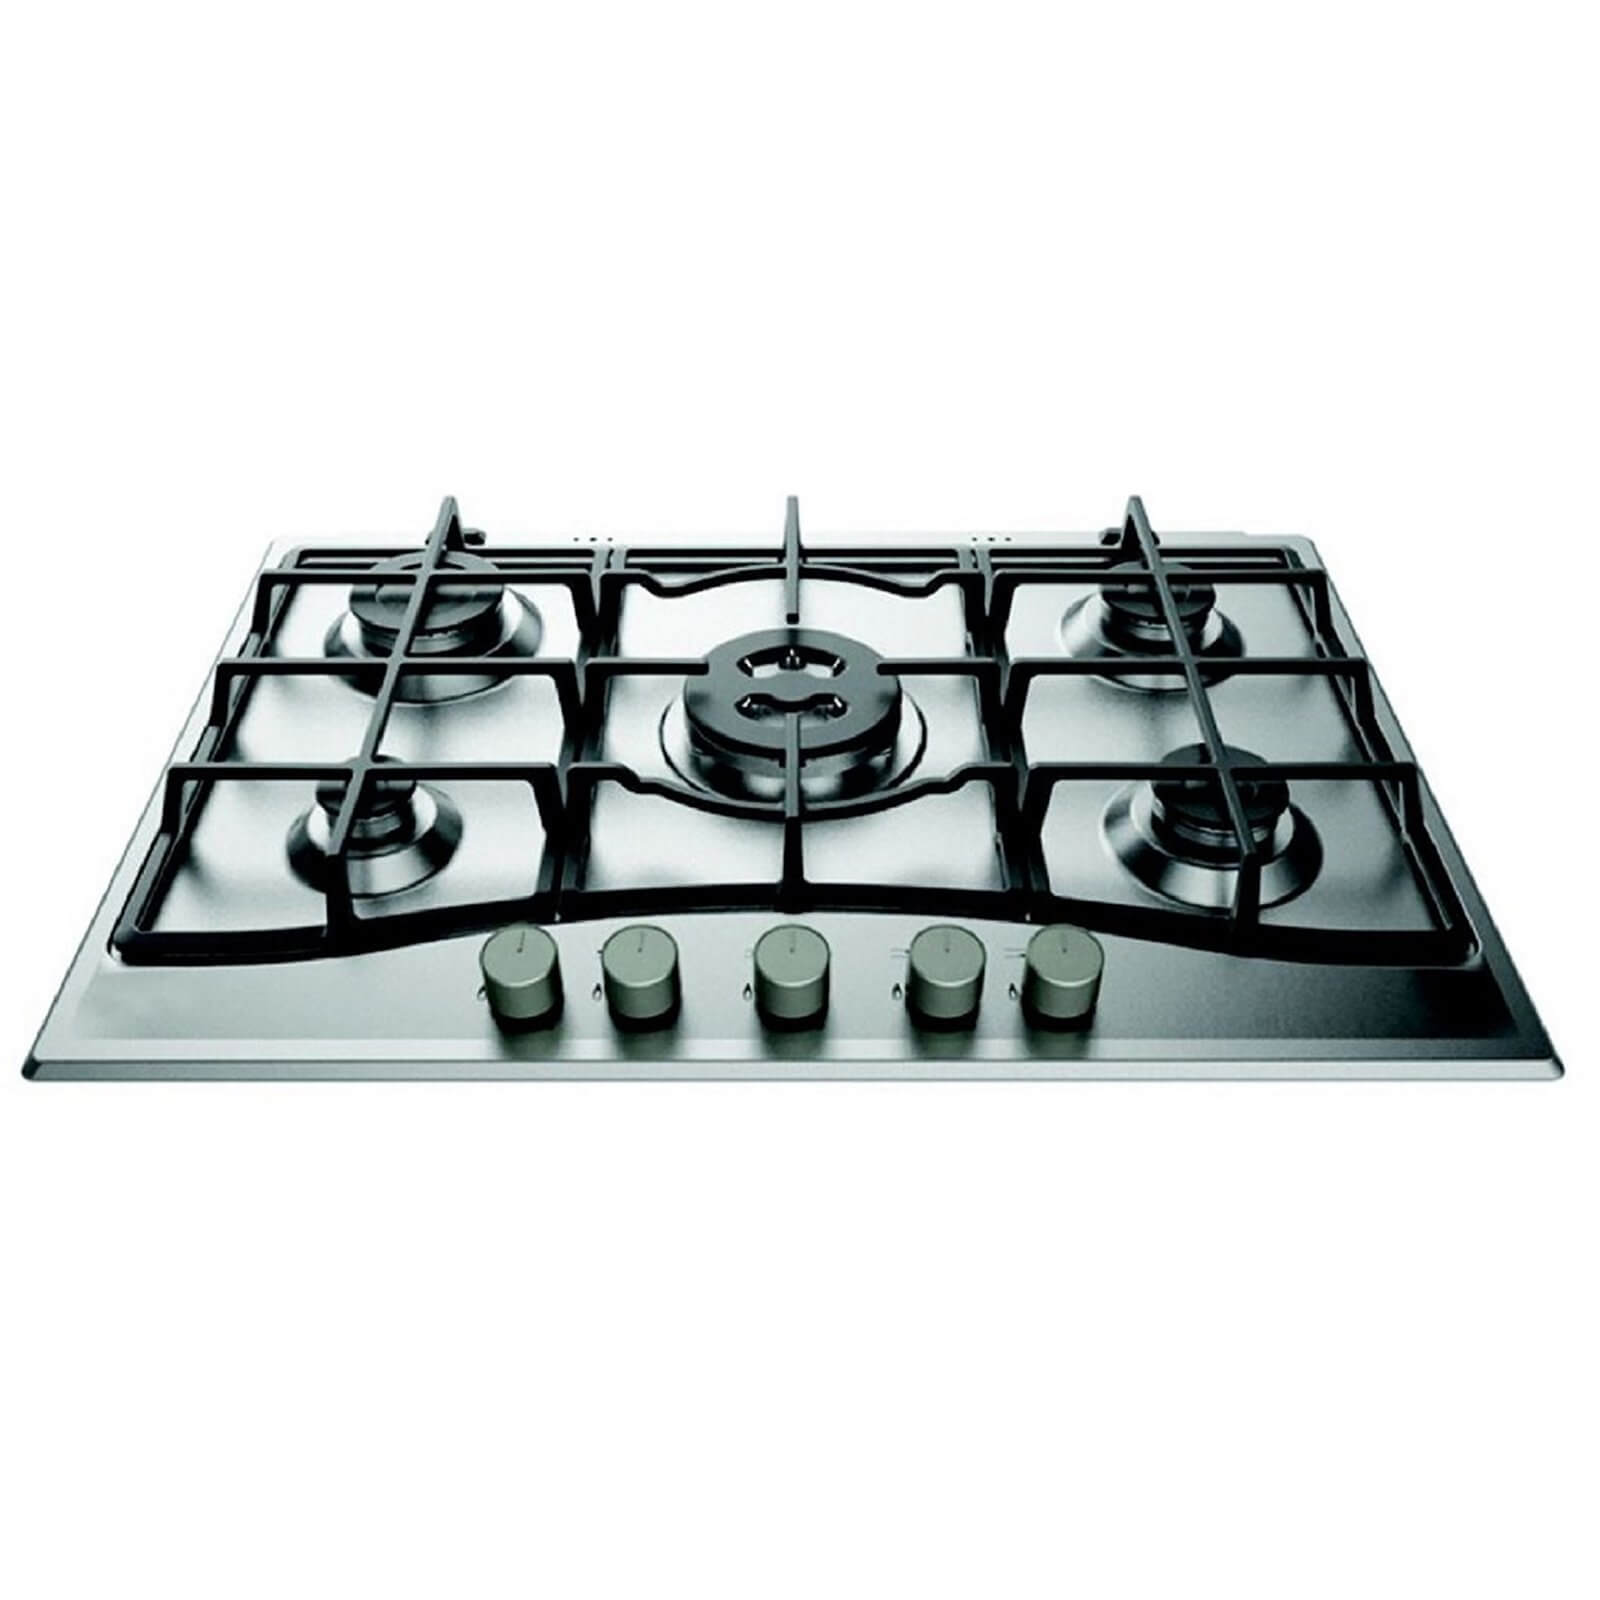 Hotpoint PCN 751 T/IX/H Built-in Gas Hob - Stainless Steel